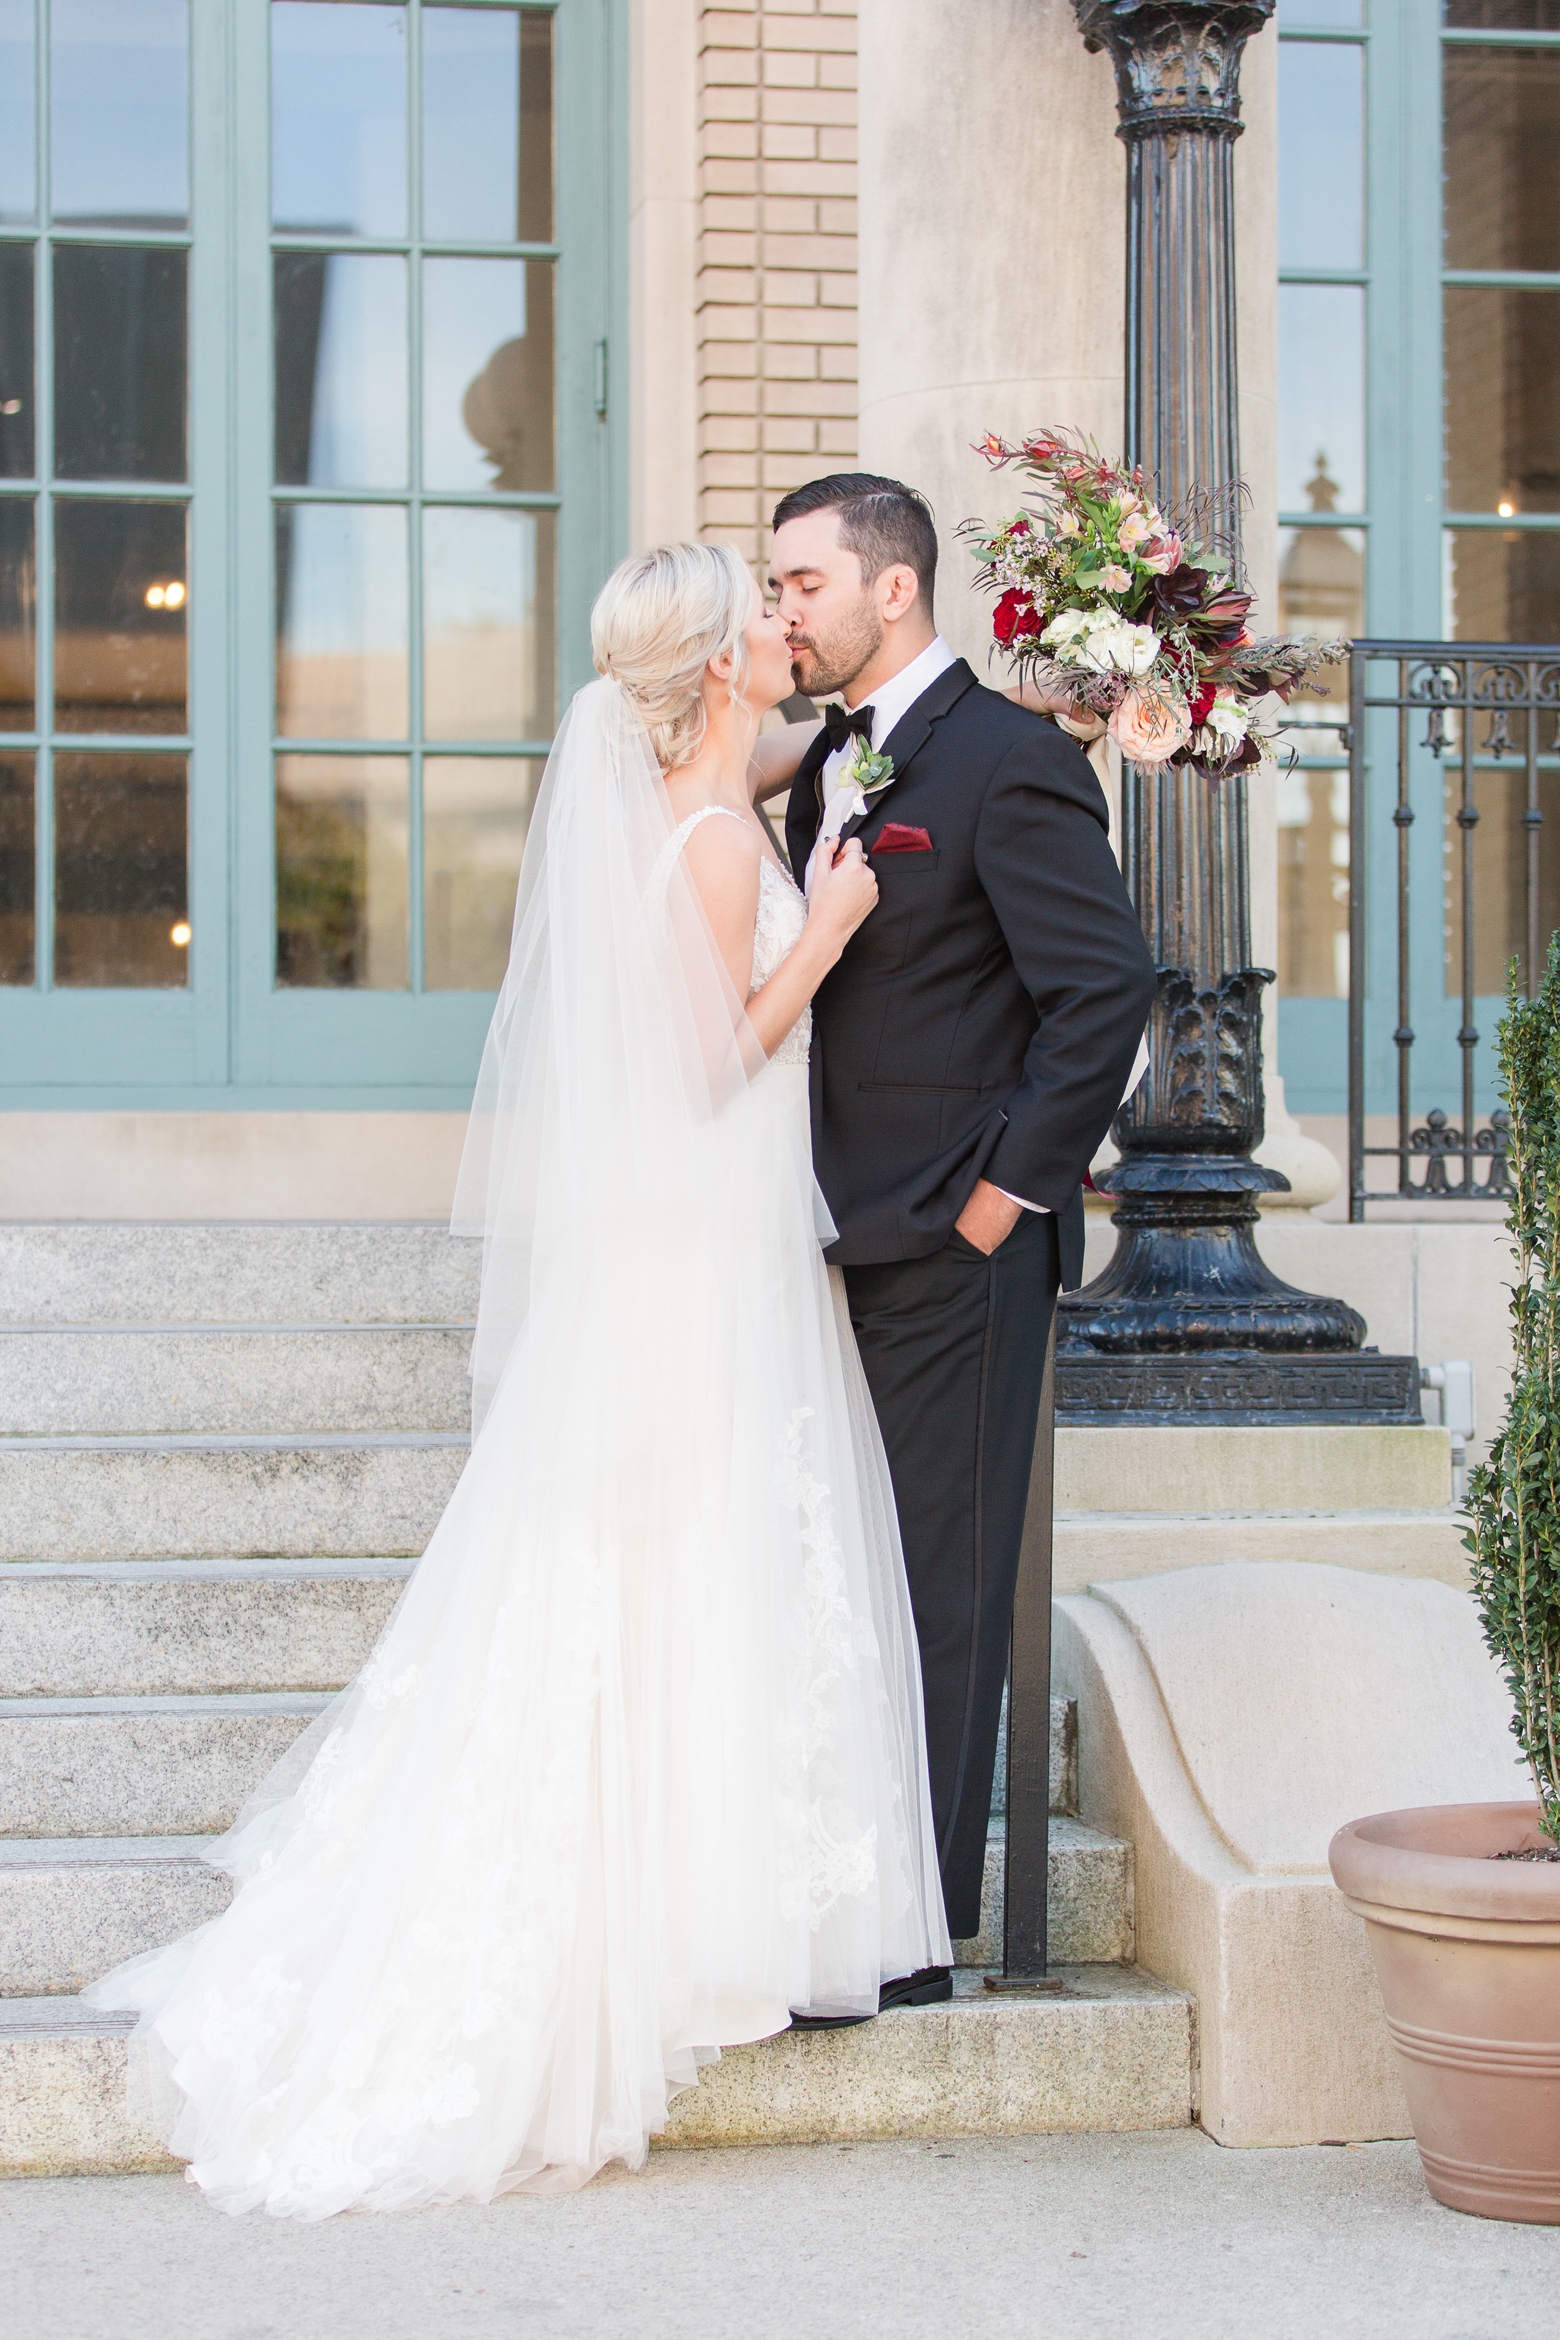 The Historic Post Office Wedding by Angie McPherson Photography